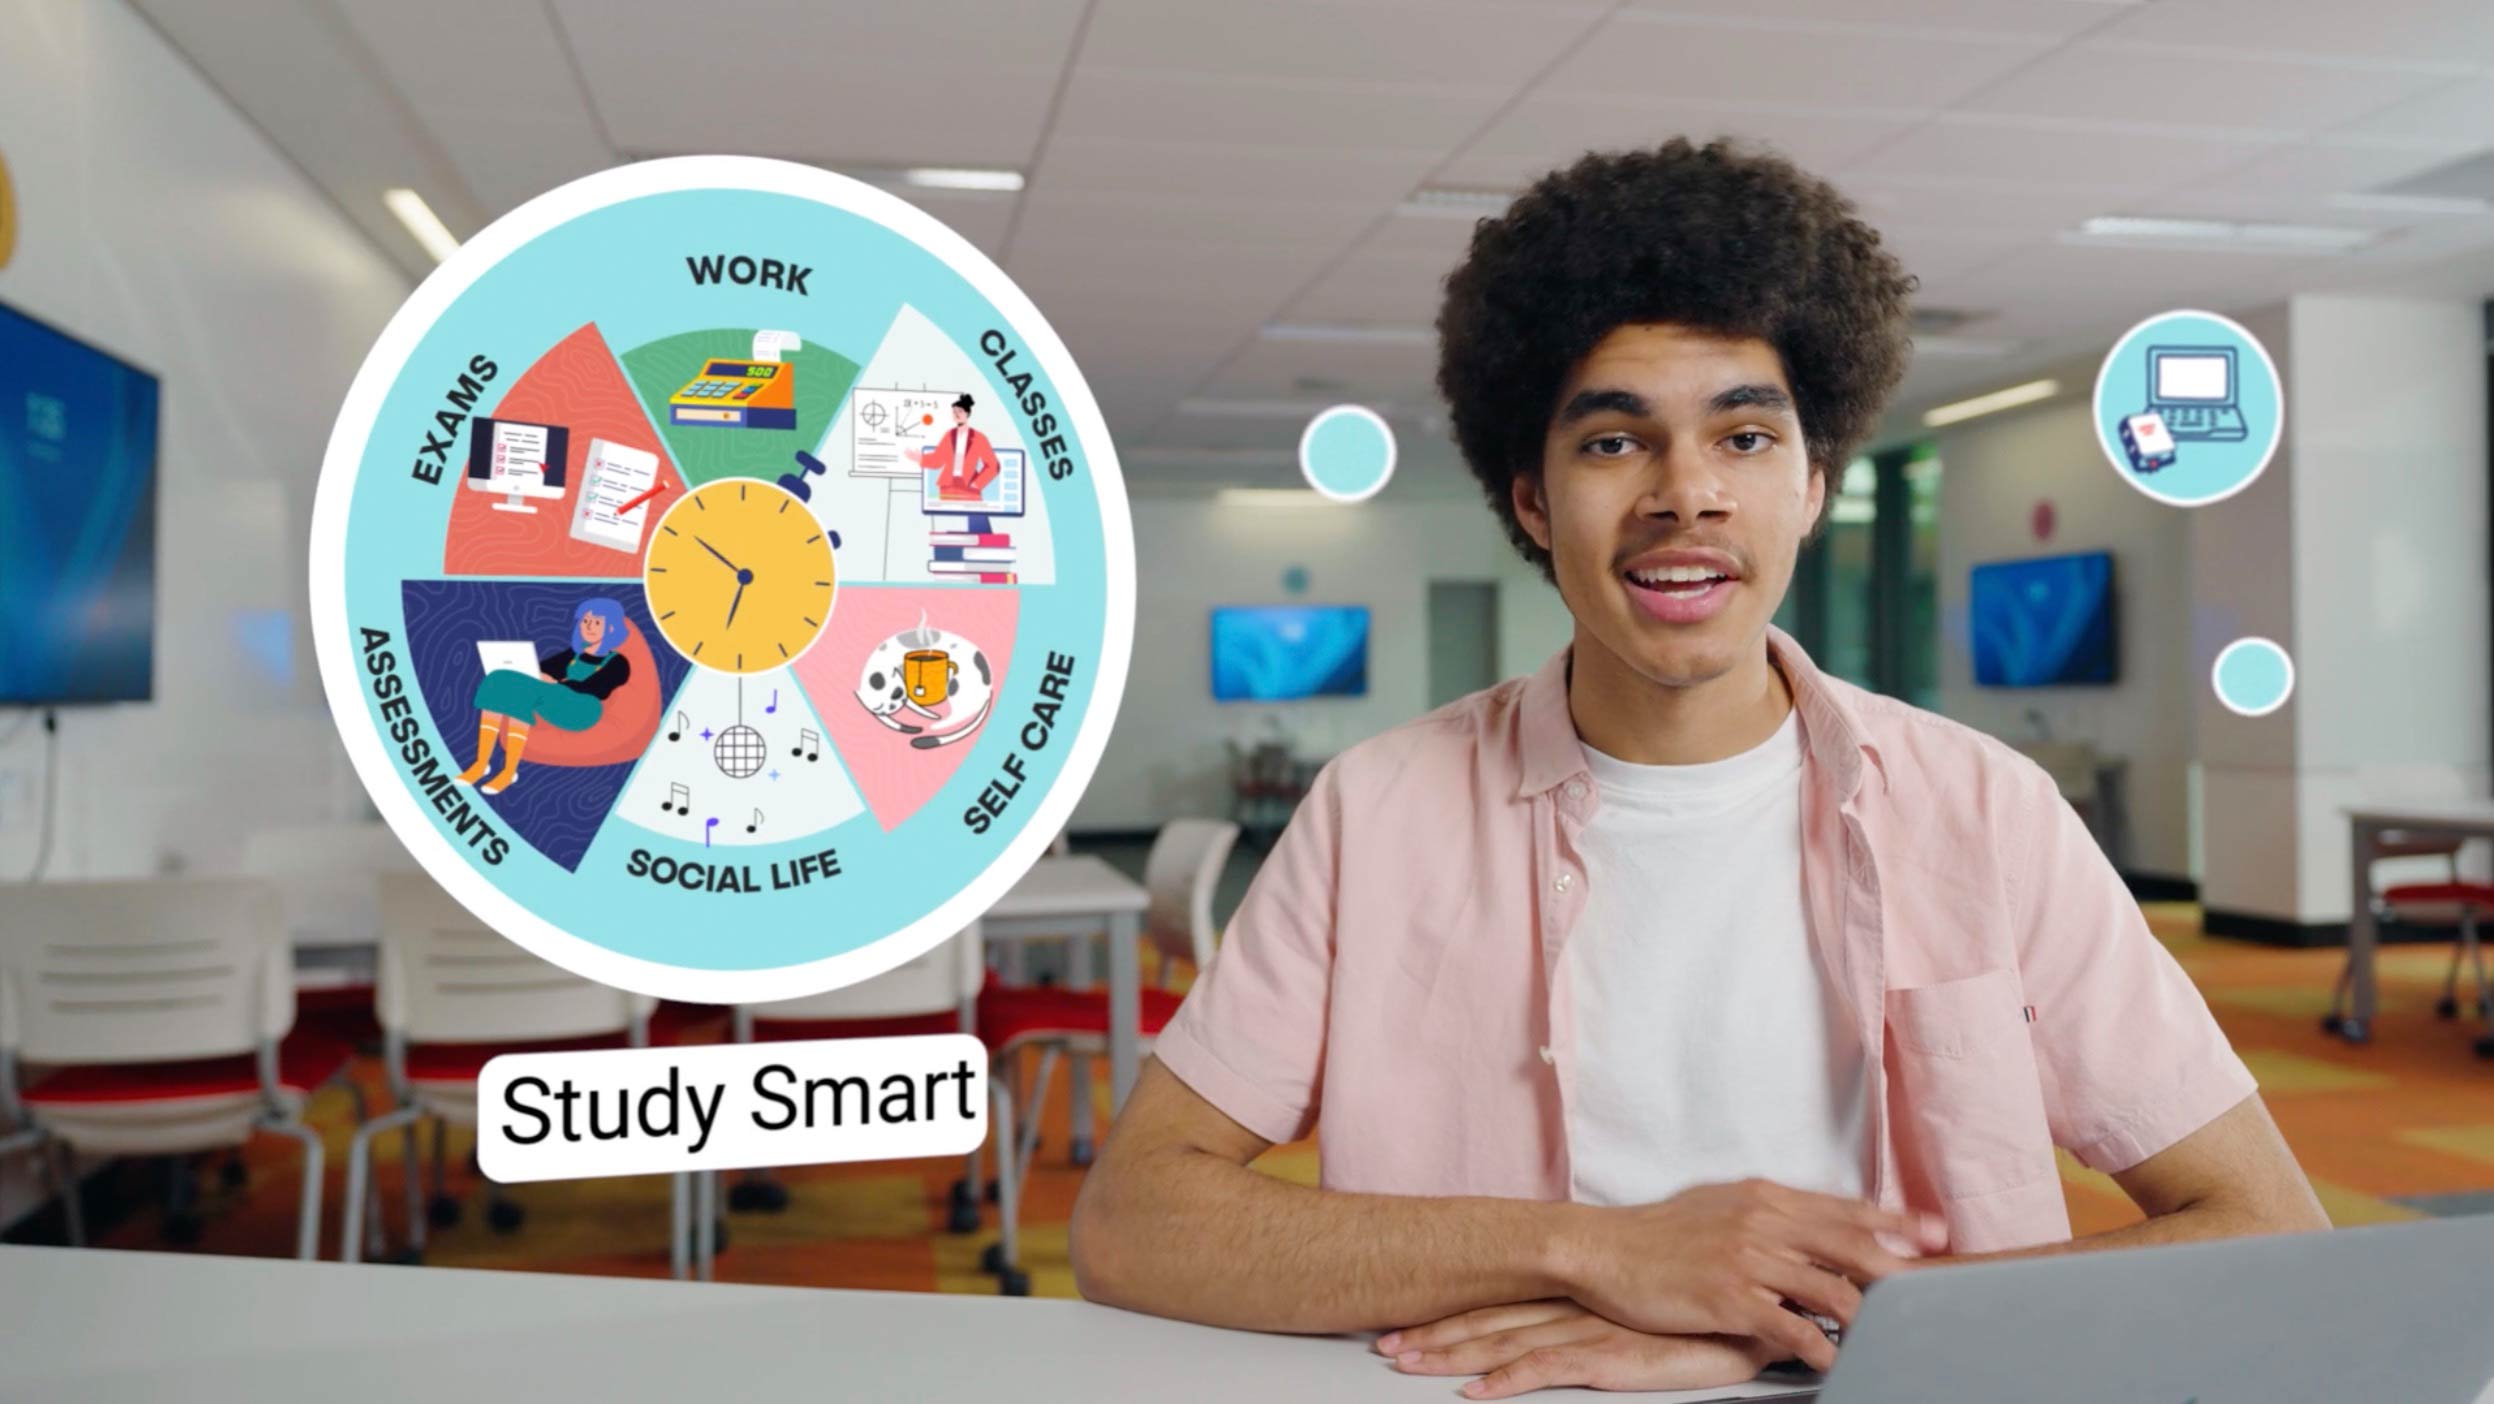 video about the 'Uni Ready toolkit'